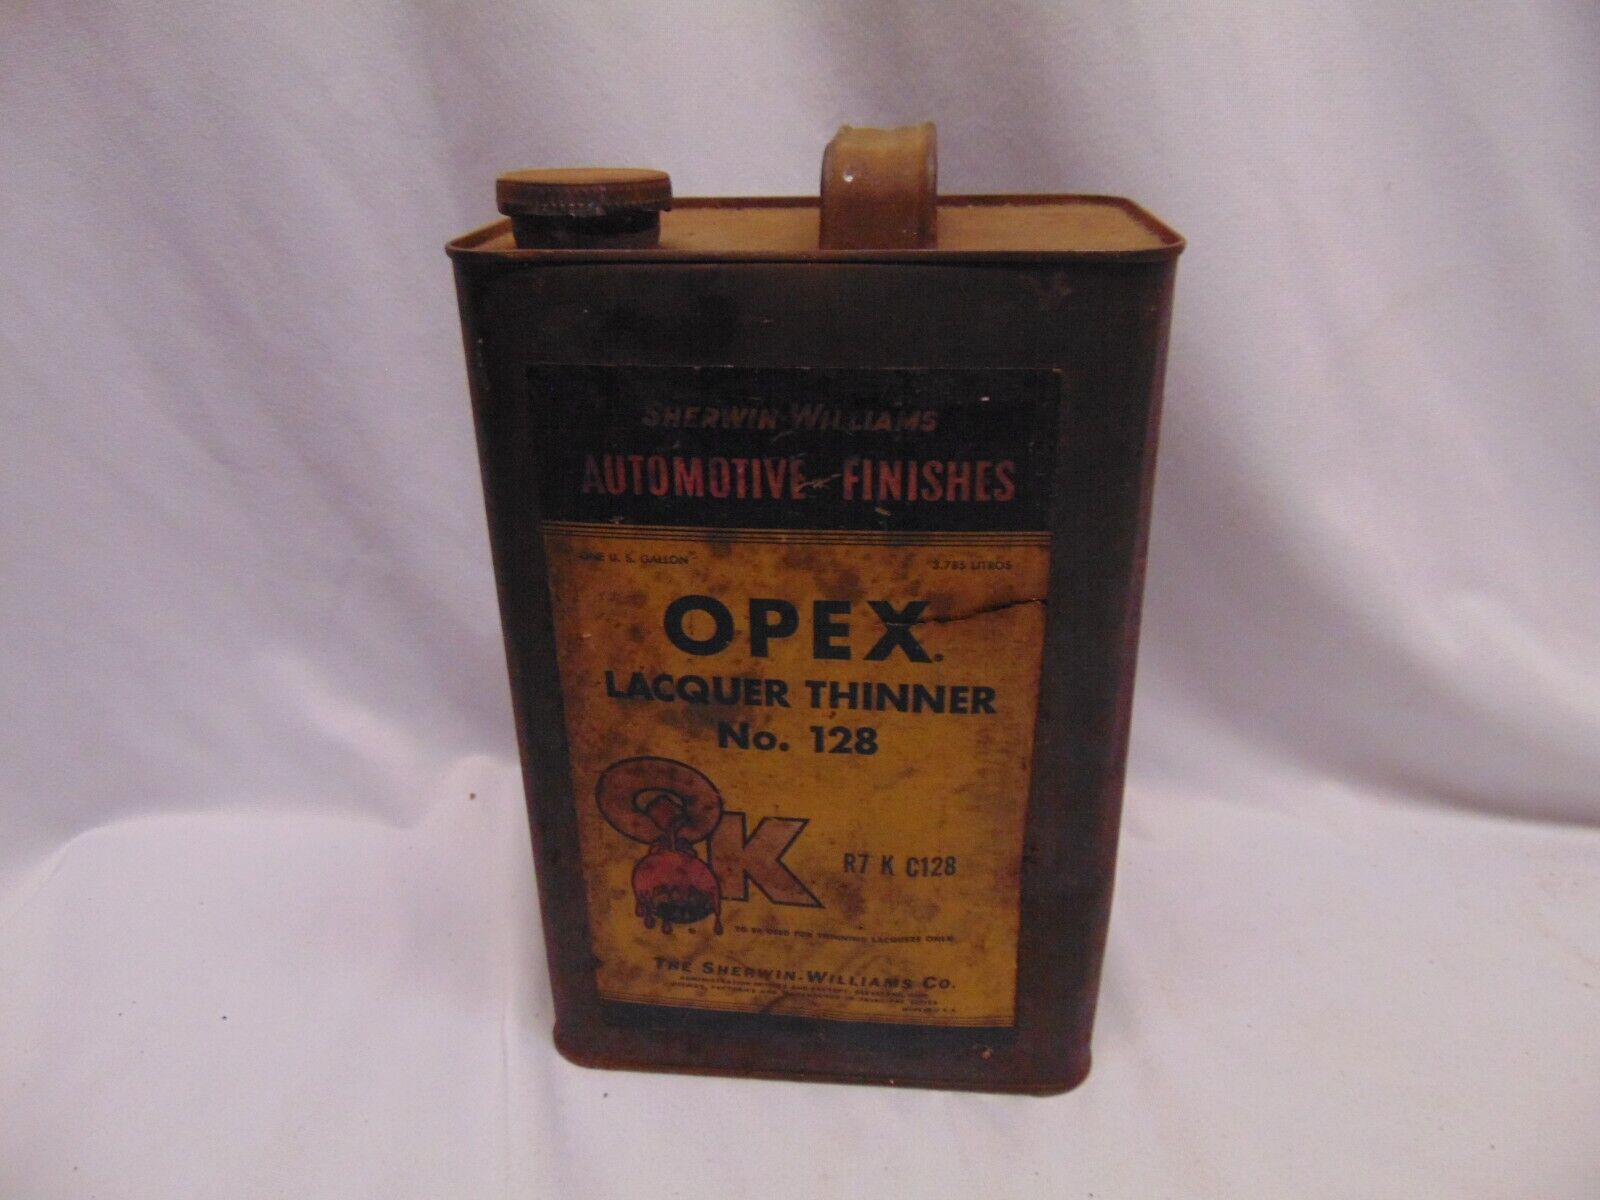 Vintage Sherwin Williams Opex Lacquer Thinner #128 1 Gallon Can w/ cap